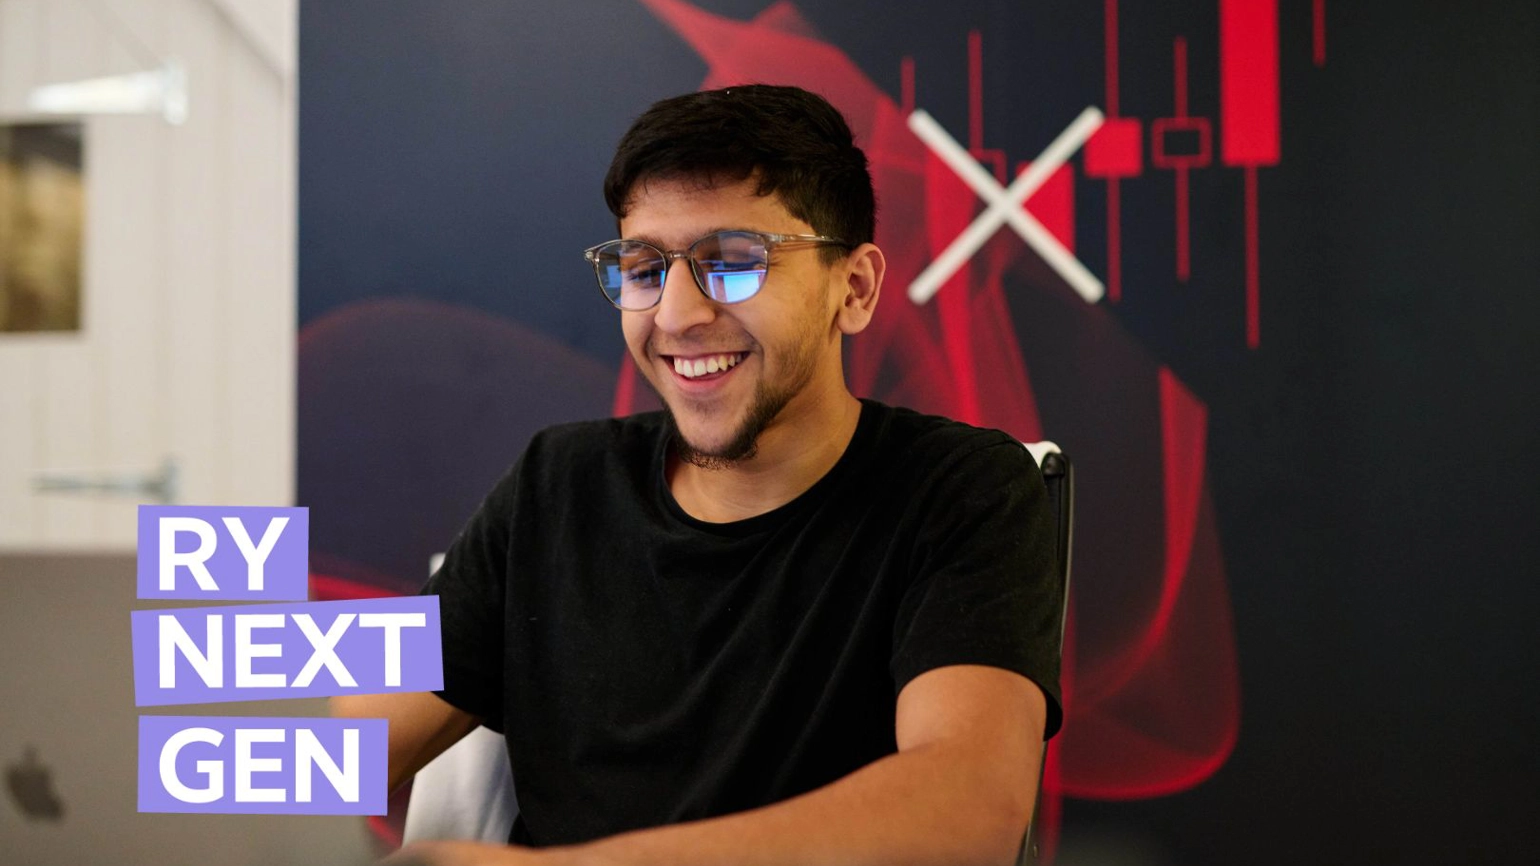 Radley Yeldar intern Mo sits in front of a computer, smiling